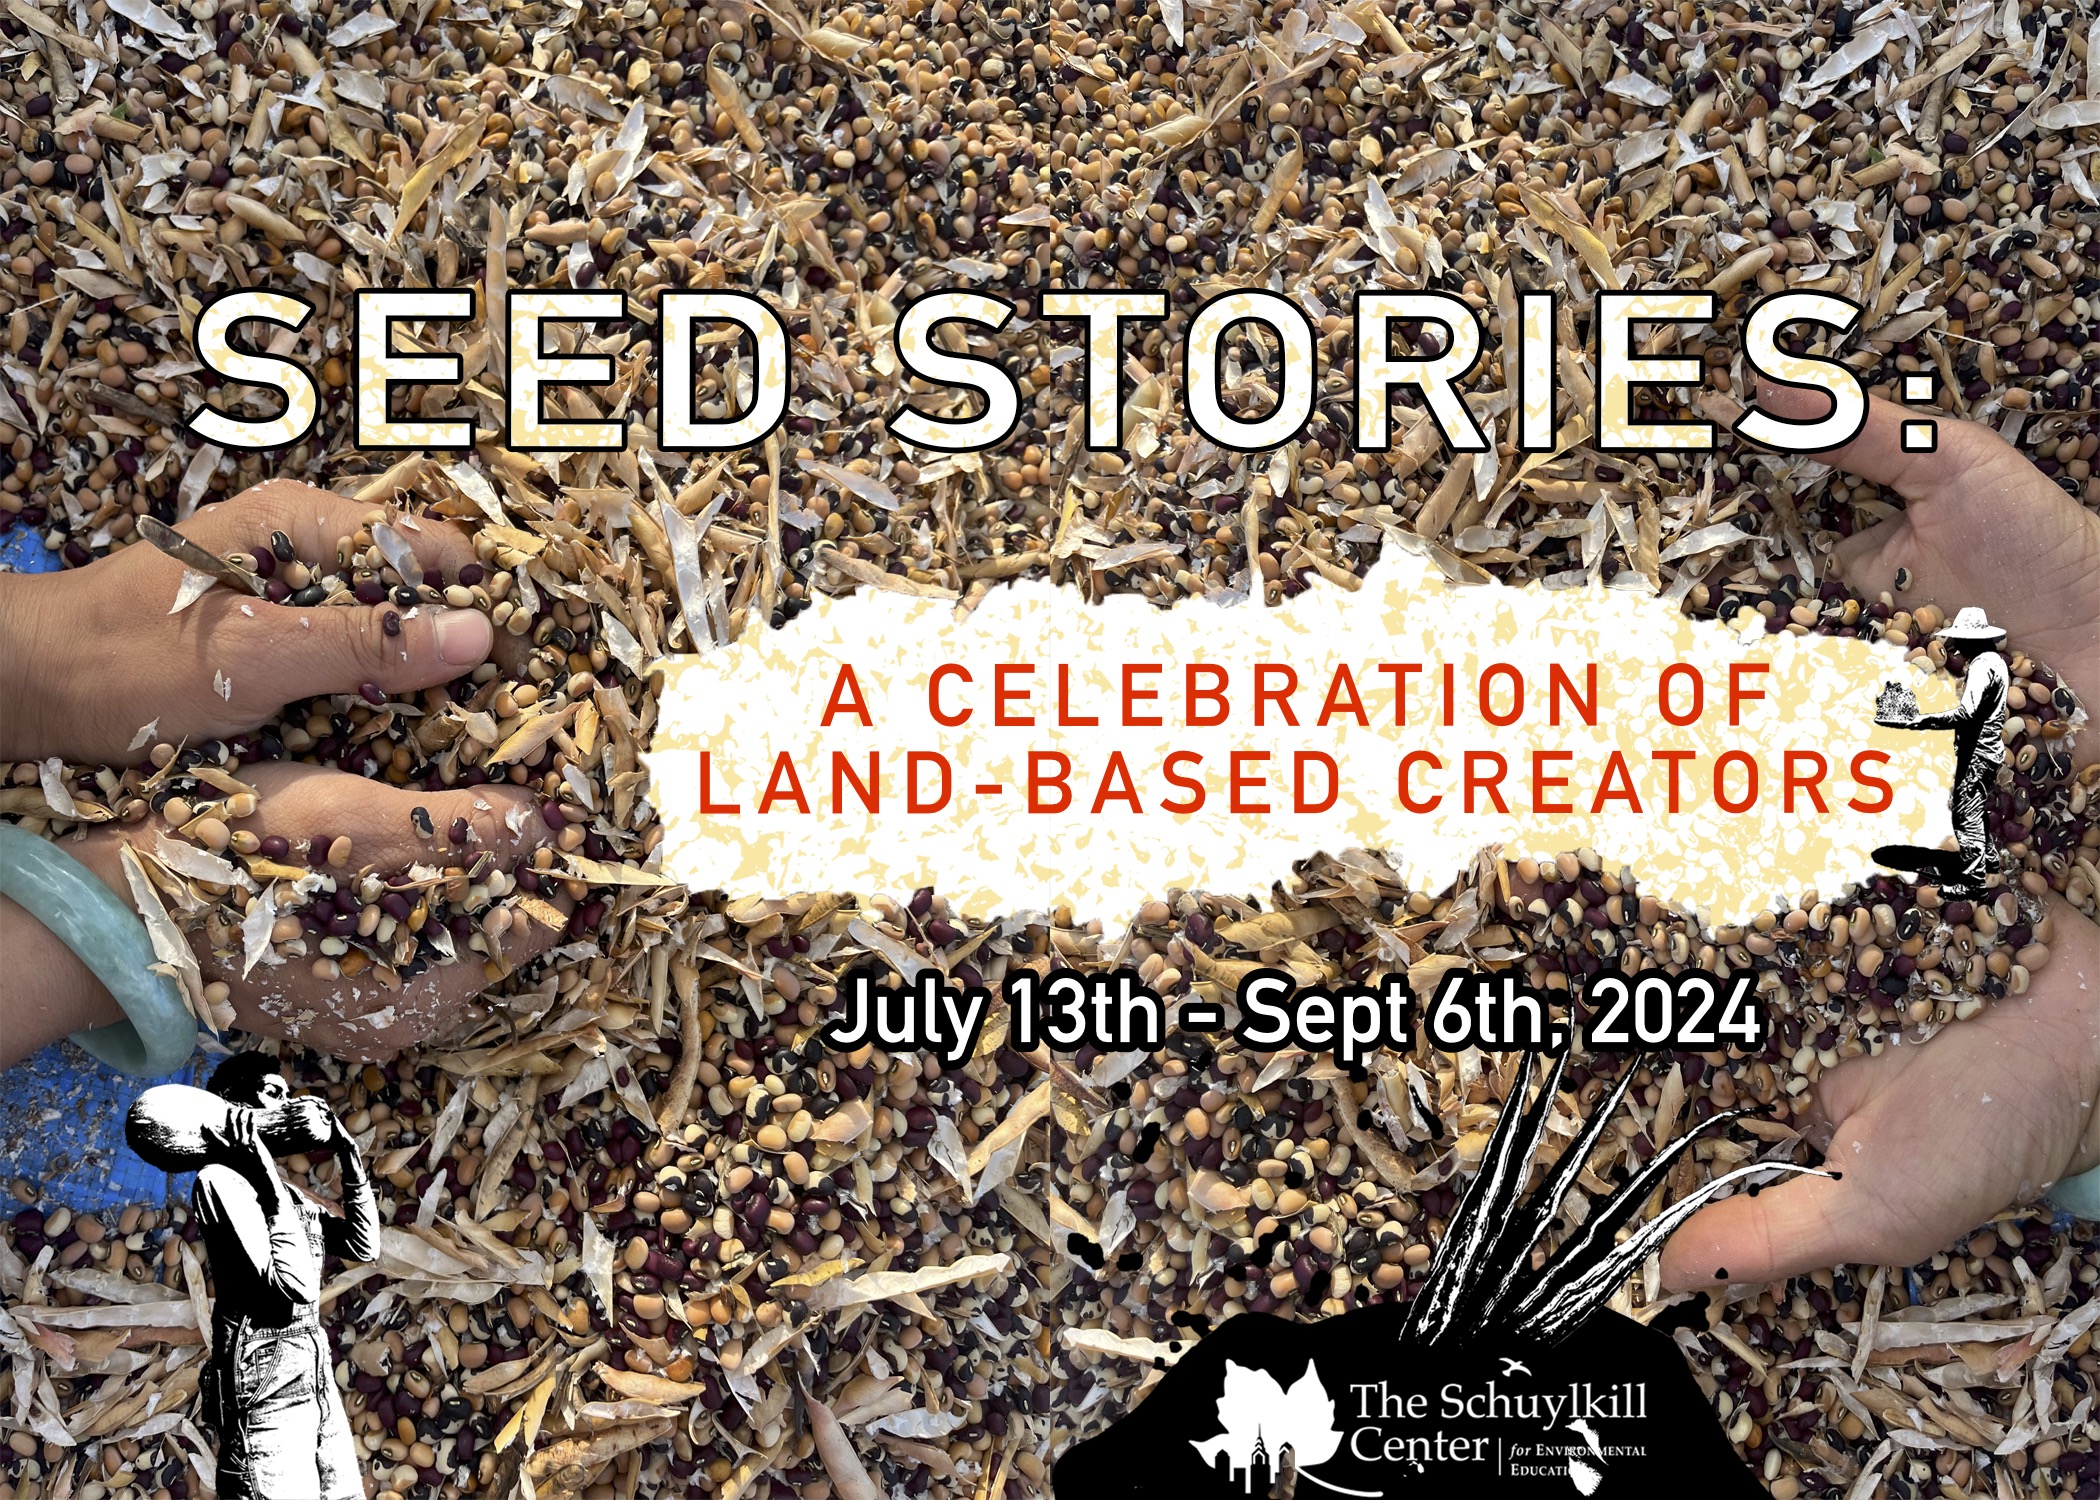 Graphic for art exhibition: Seed Stories, with two sets of hands in seeds and a Schuylkill Center logo